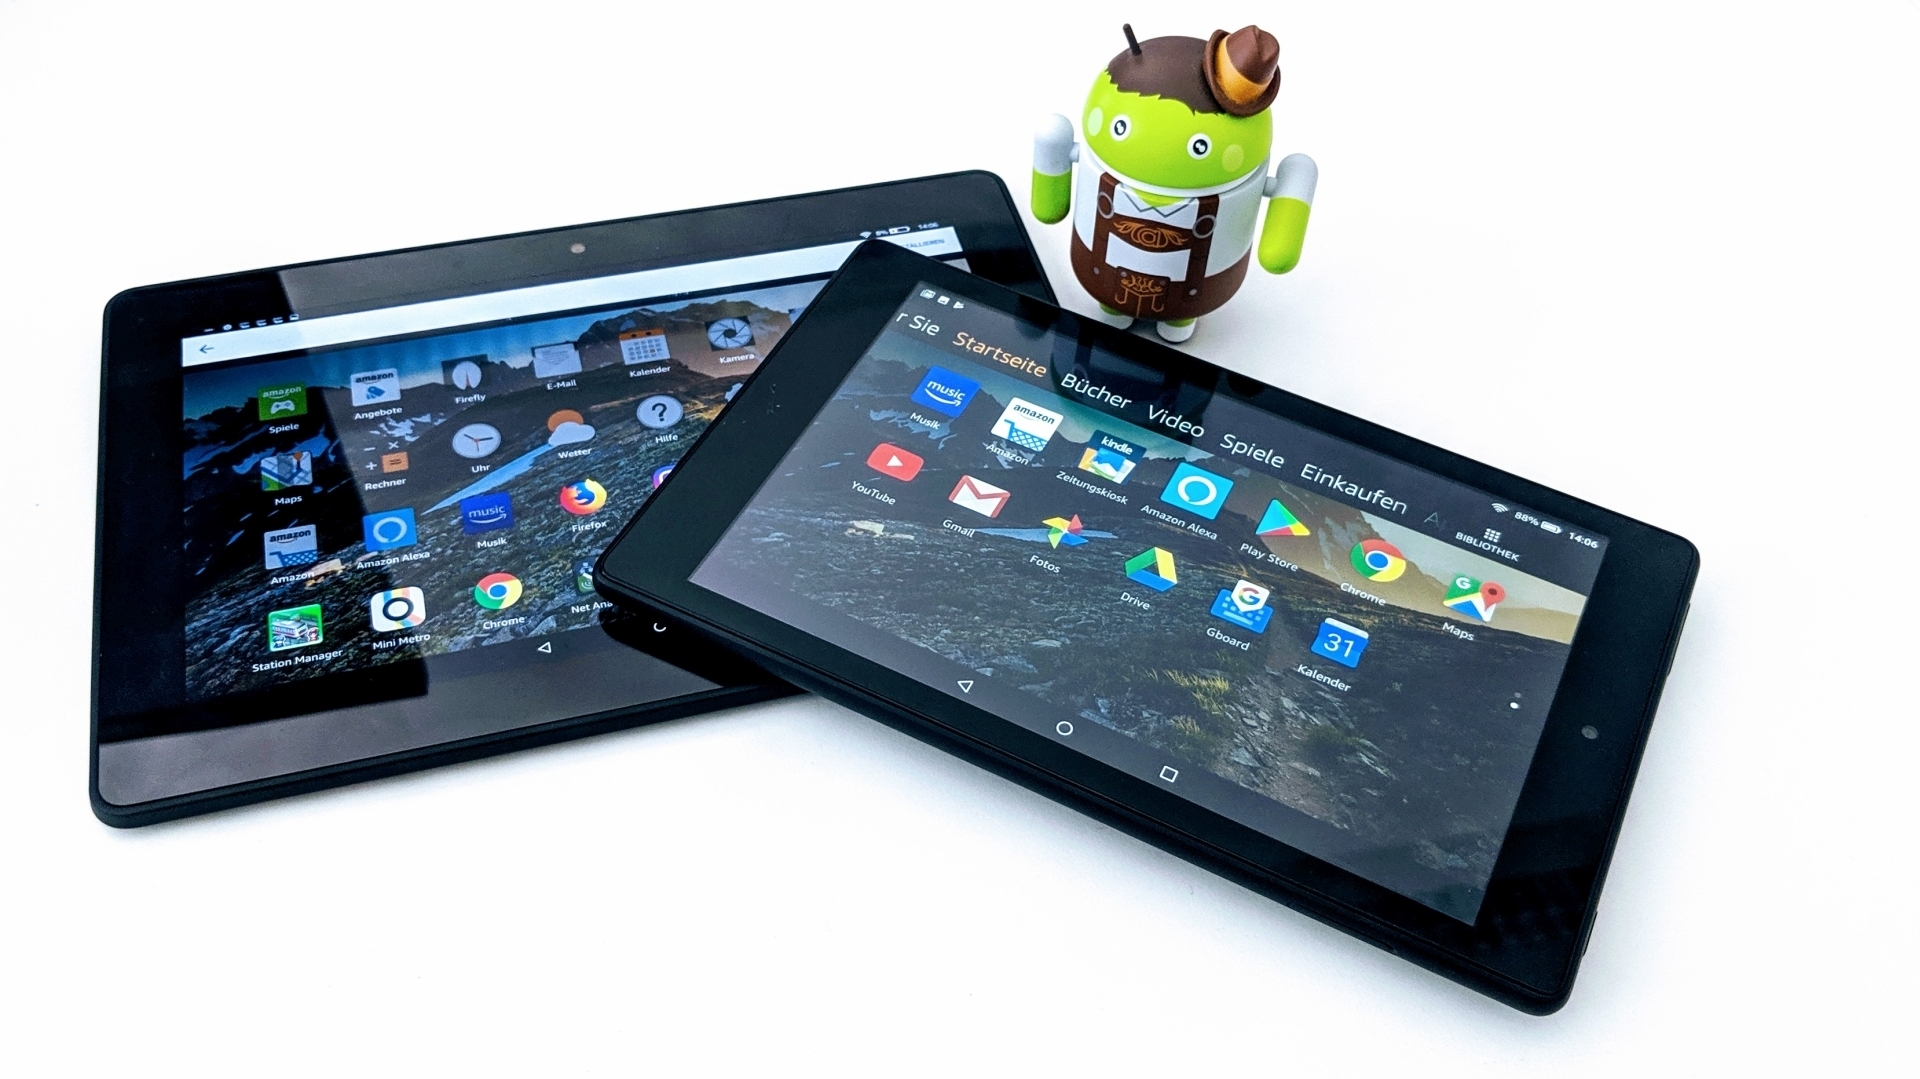 Amazons Fire Tablets: Google Play Store und Android-Apps installieren |  heise online